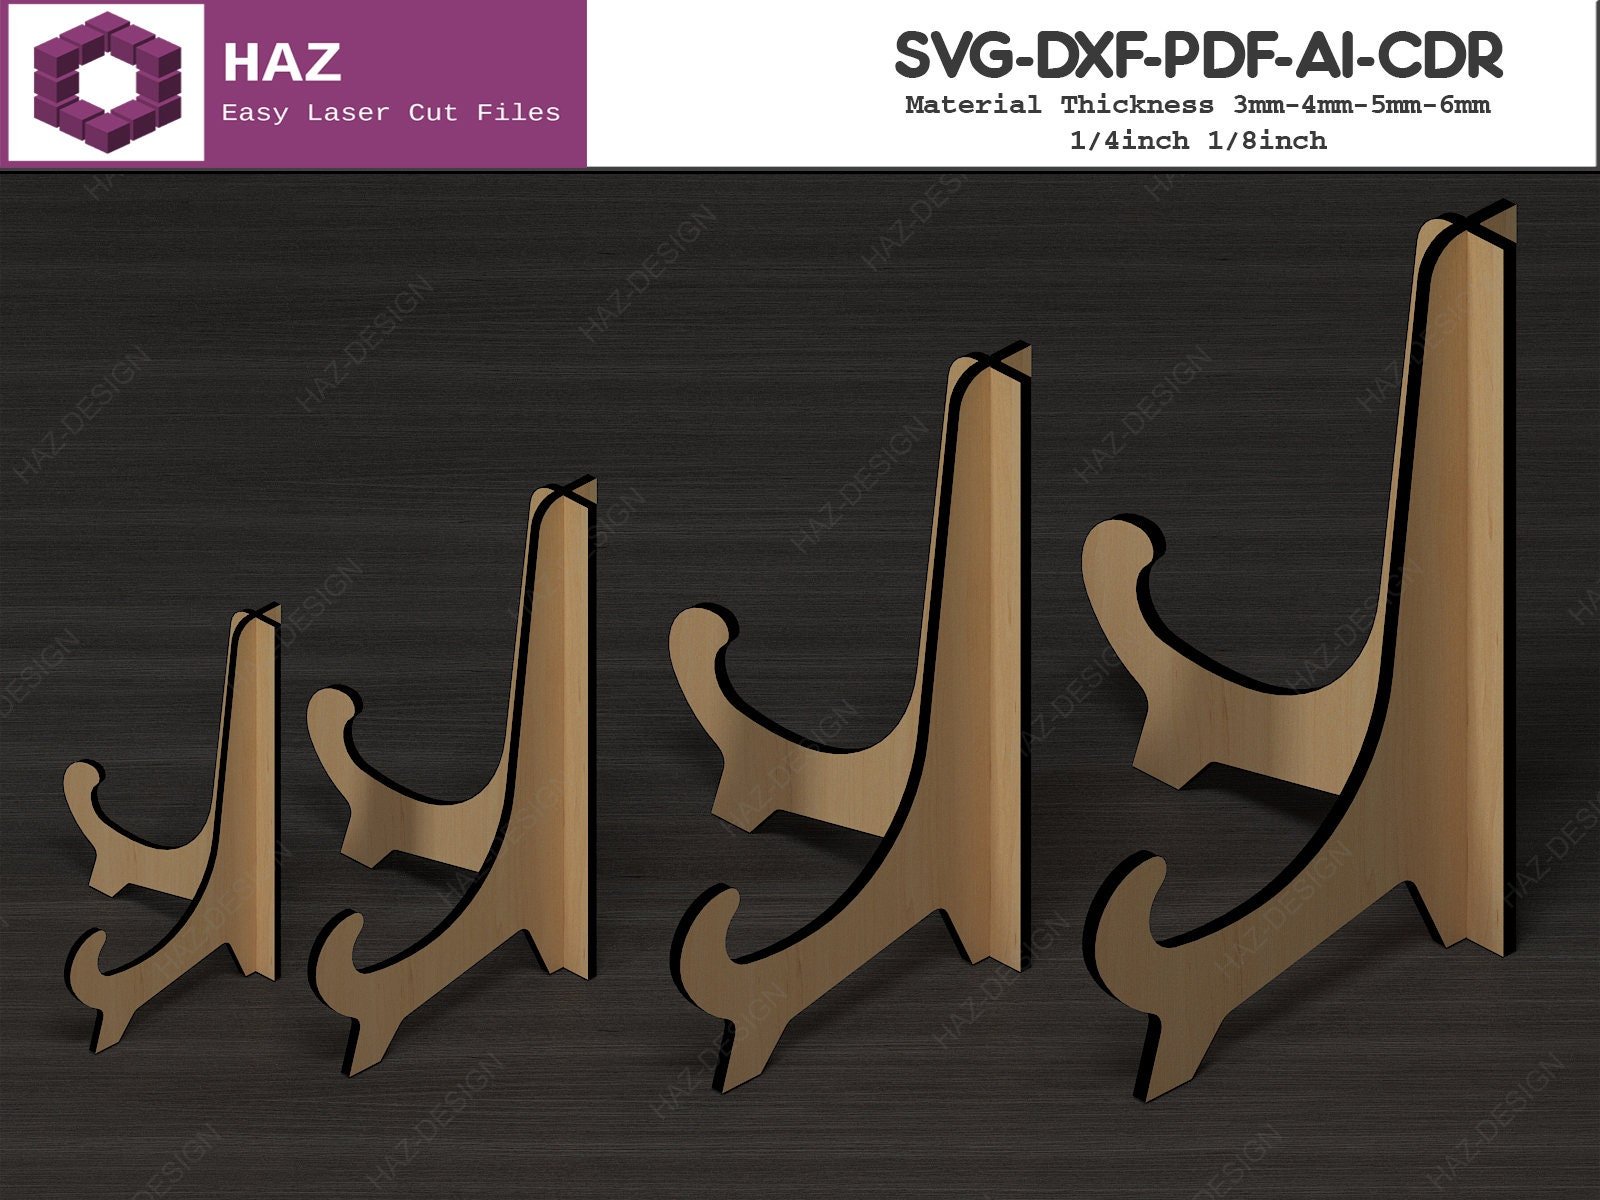 Wood Easel Stands / Frame Display Holders / Wooden Laser Cut Files SVG DXF  Ai CDR 331